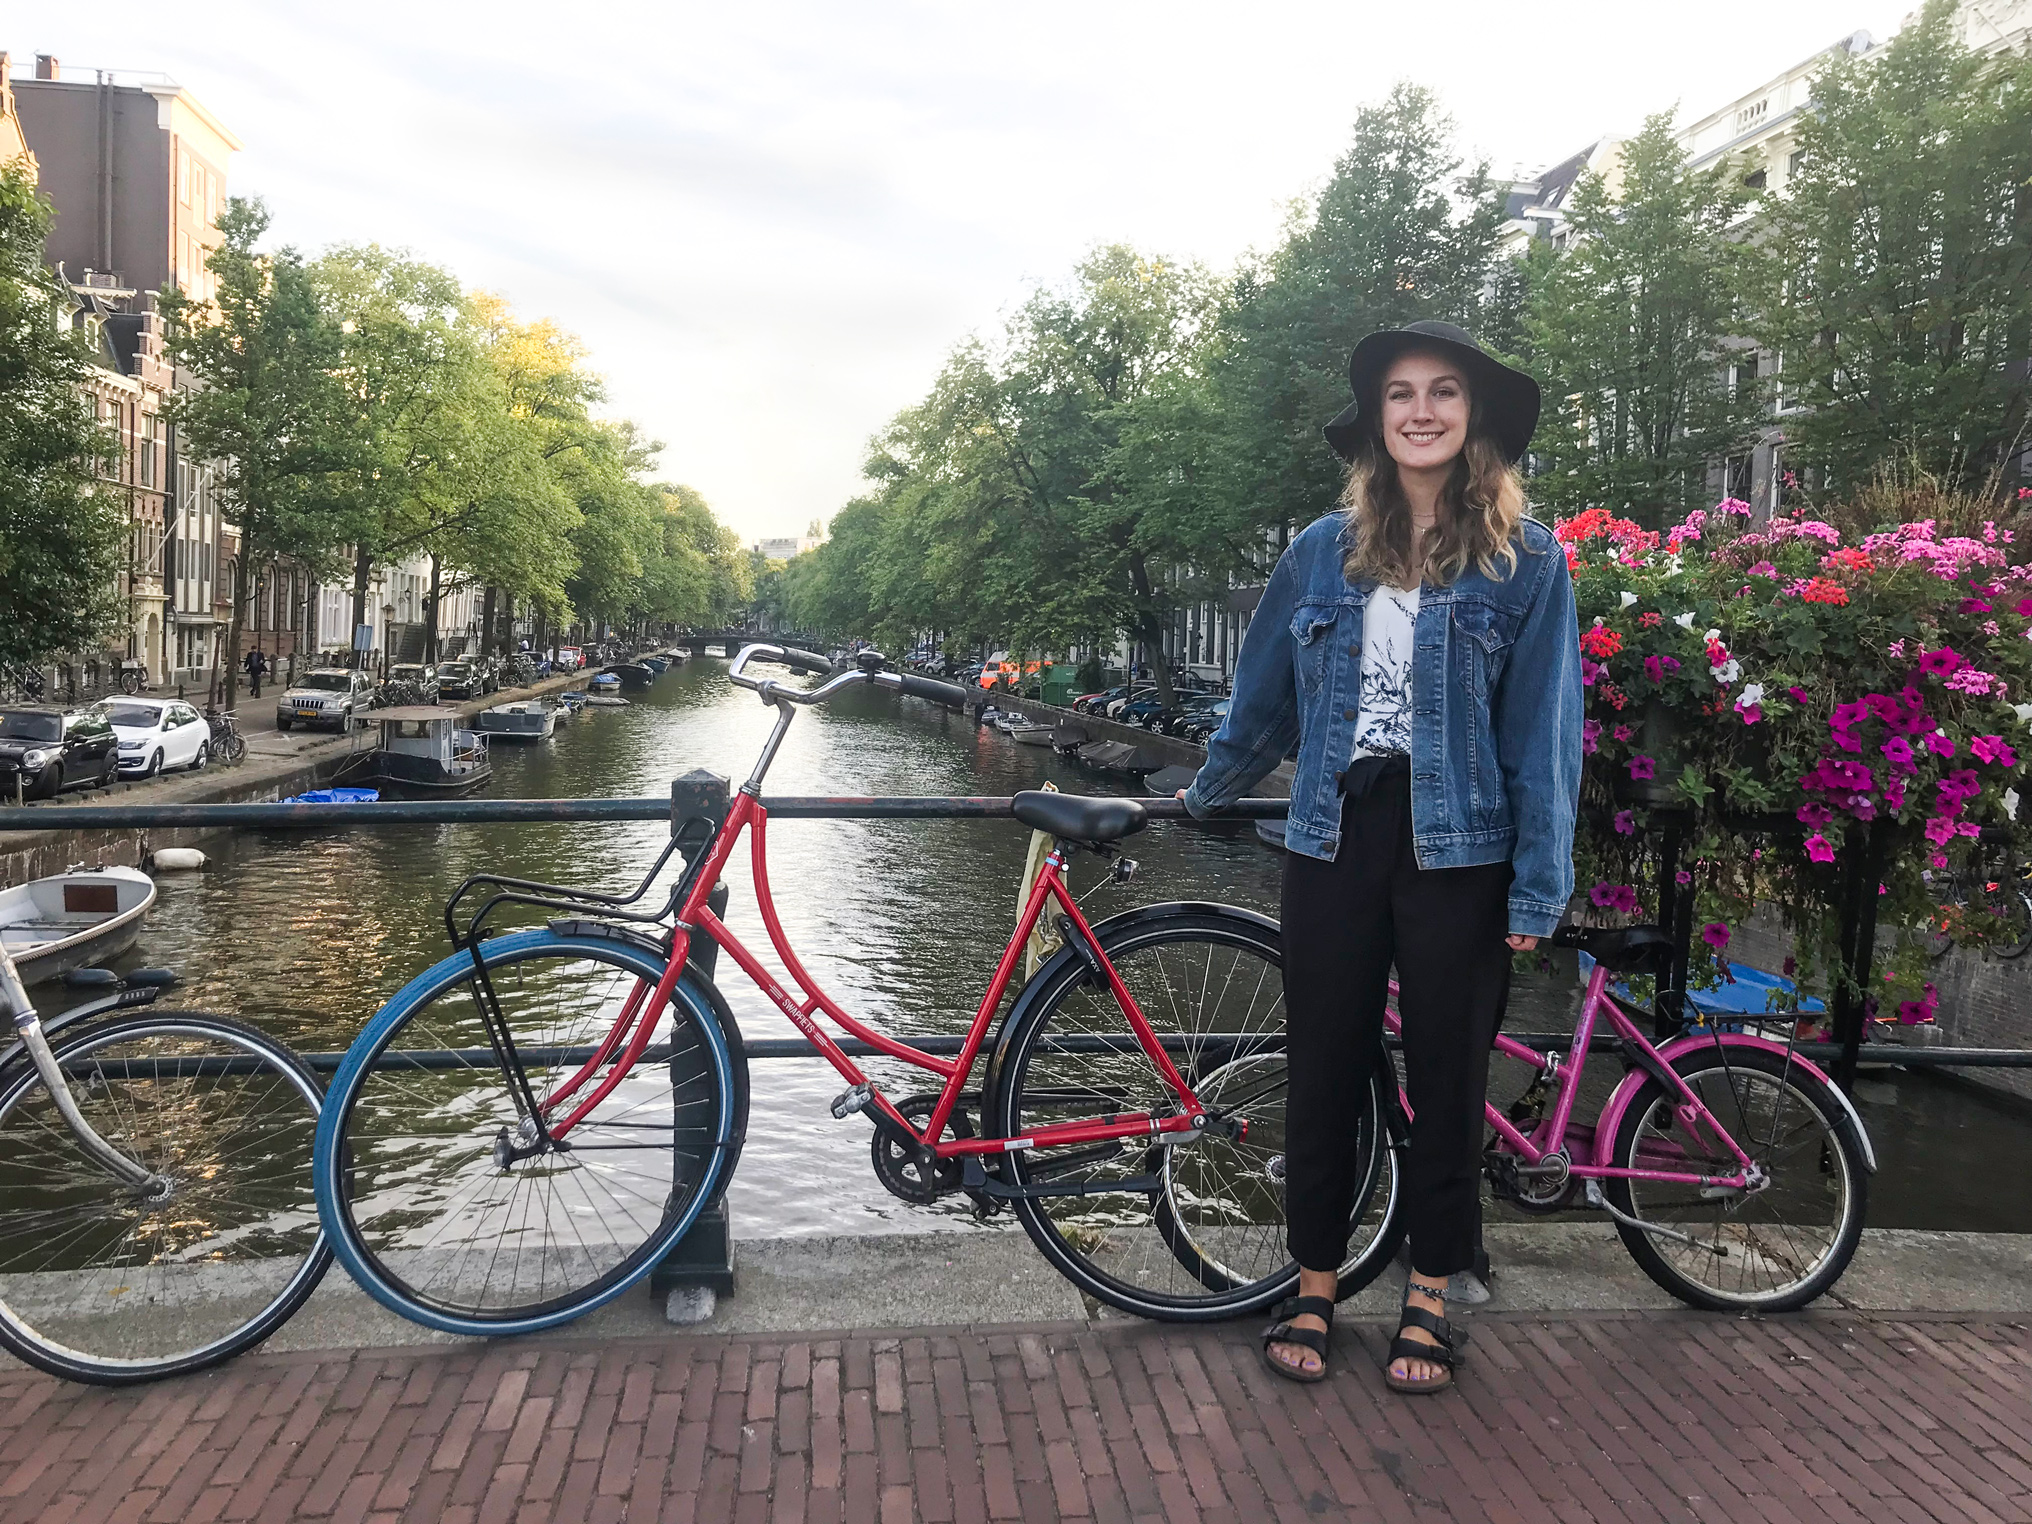 Lauren poses with a bike on a bridge over a canal in a setting that looks European